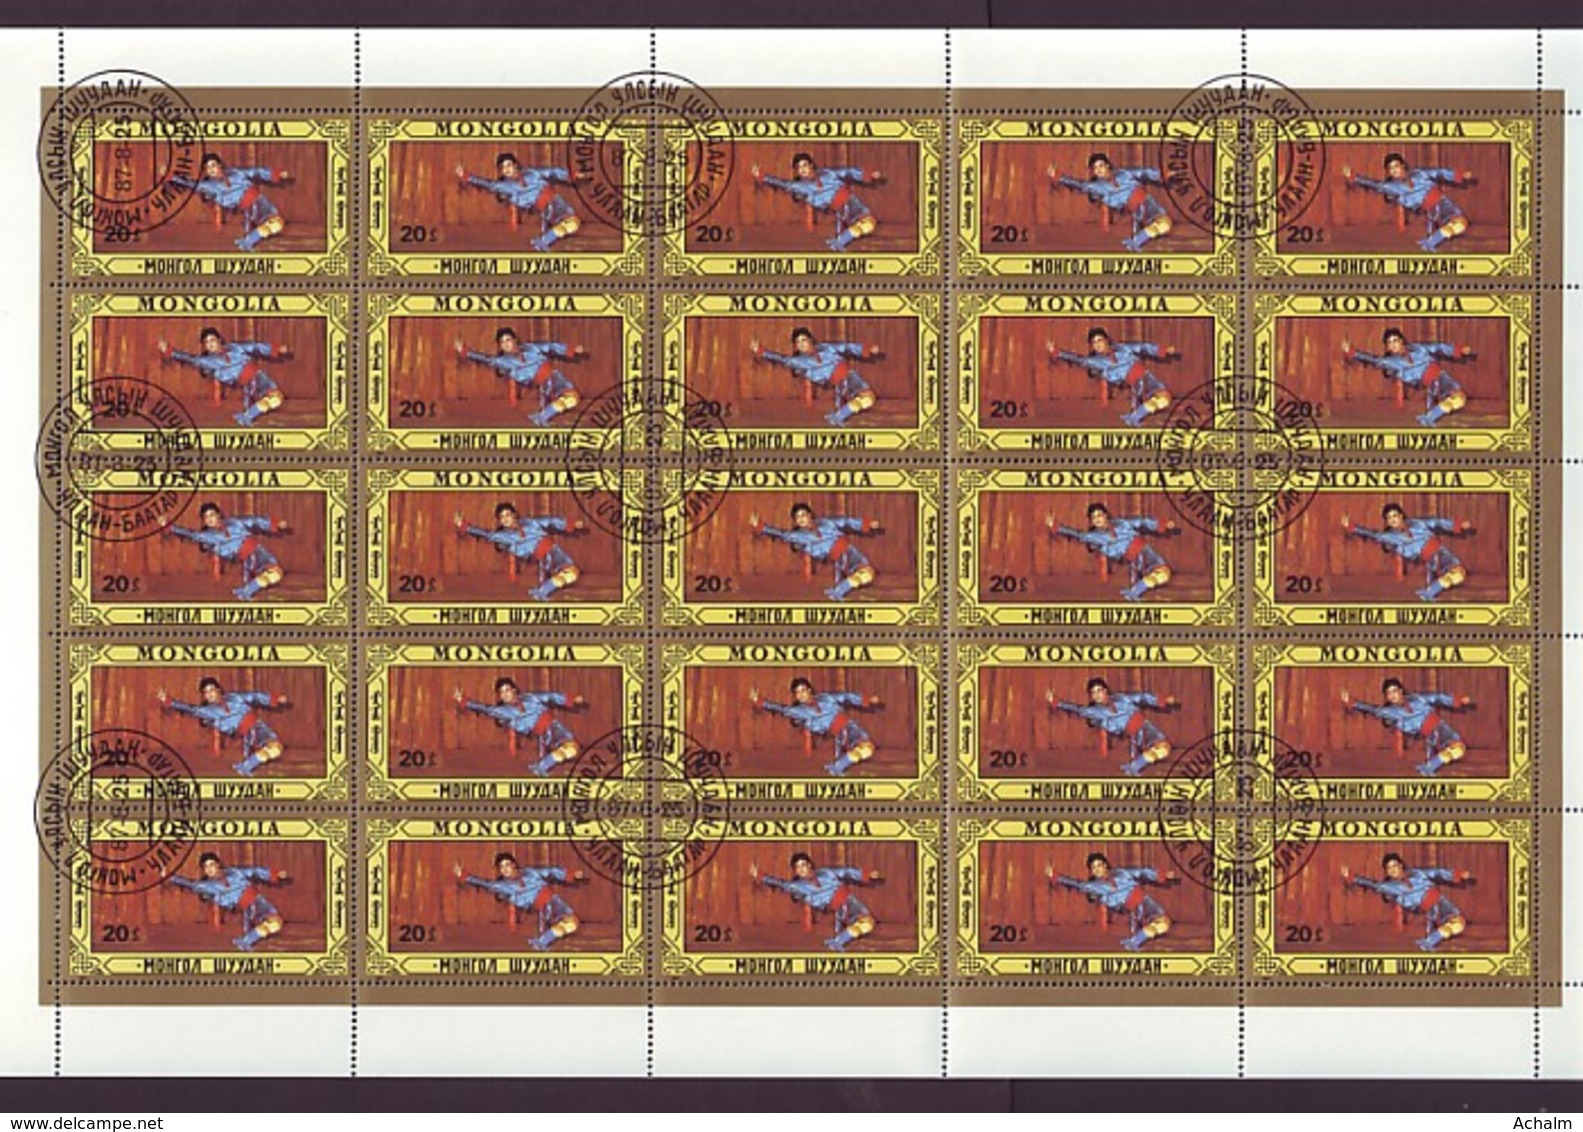 Mongolei/Mongolia Of 1987 - Sheet Of Stamps 25 X MiNr. 1885 Used - Folklore Dancers And Dance Groups - Mongolie